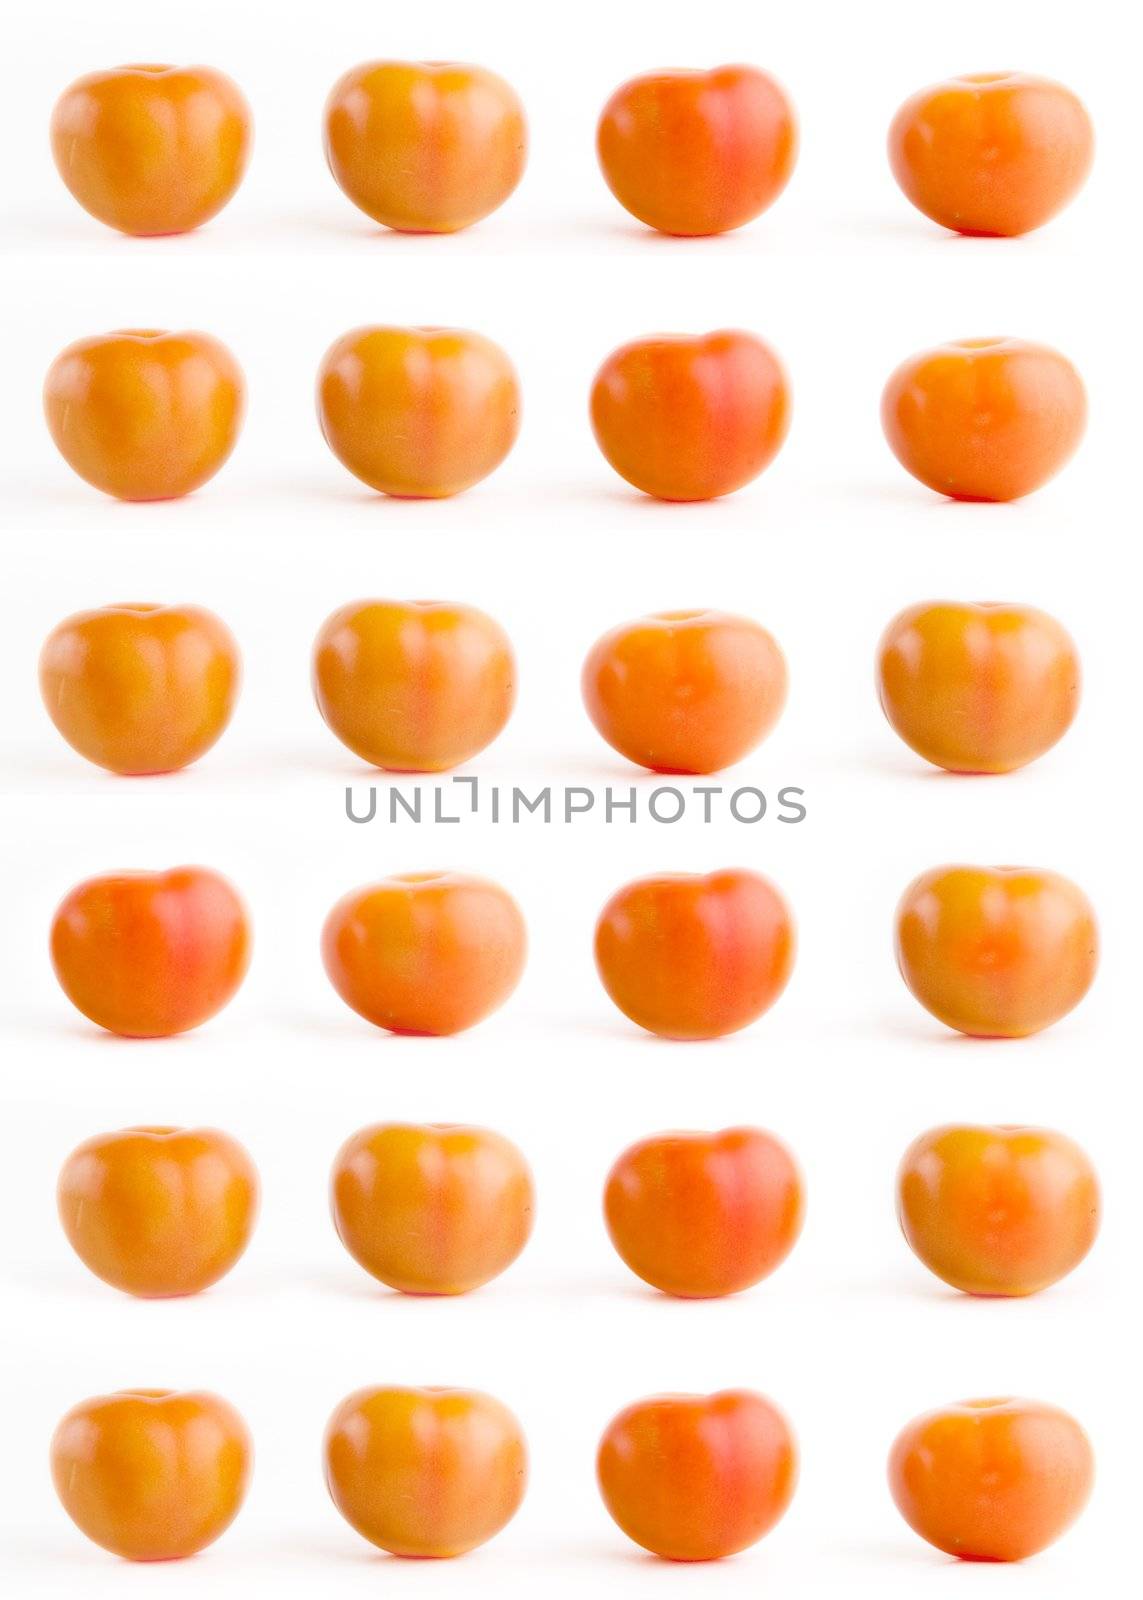 Tomato texture background of repeating tomatoes